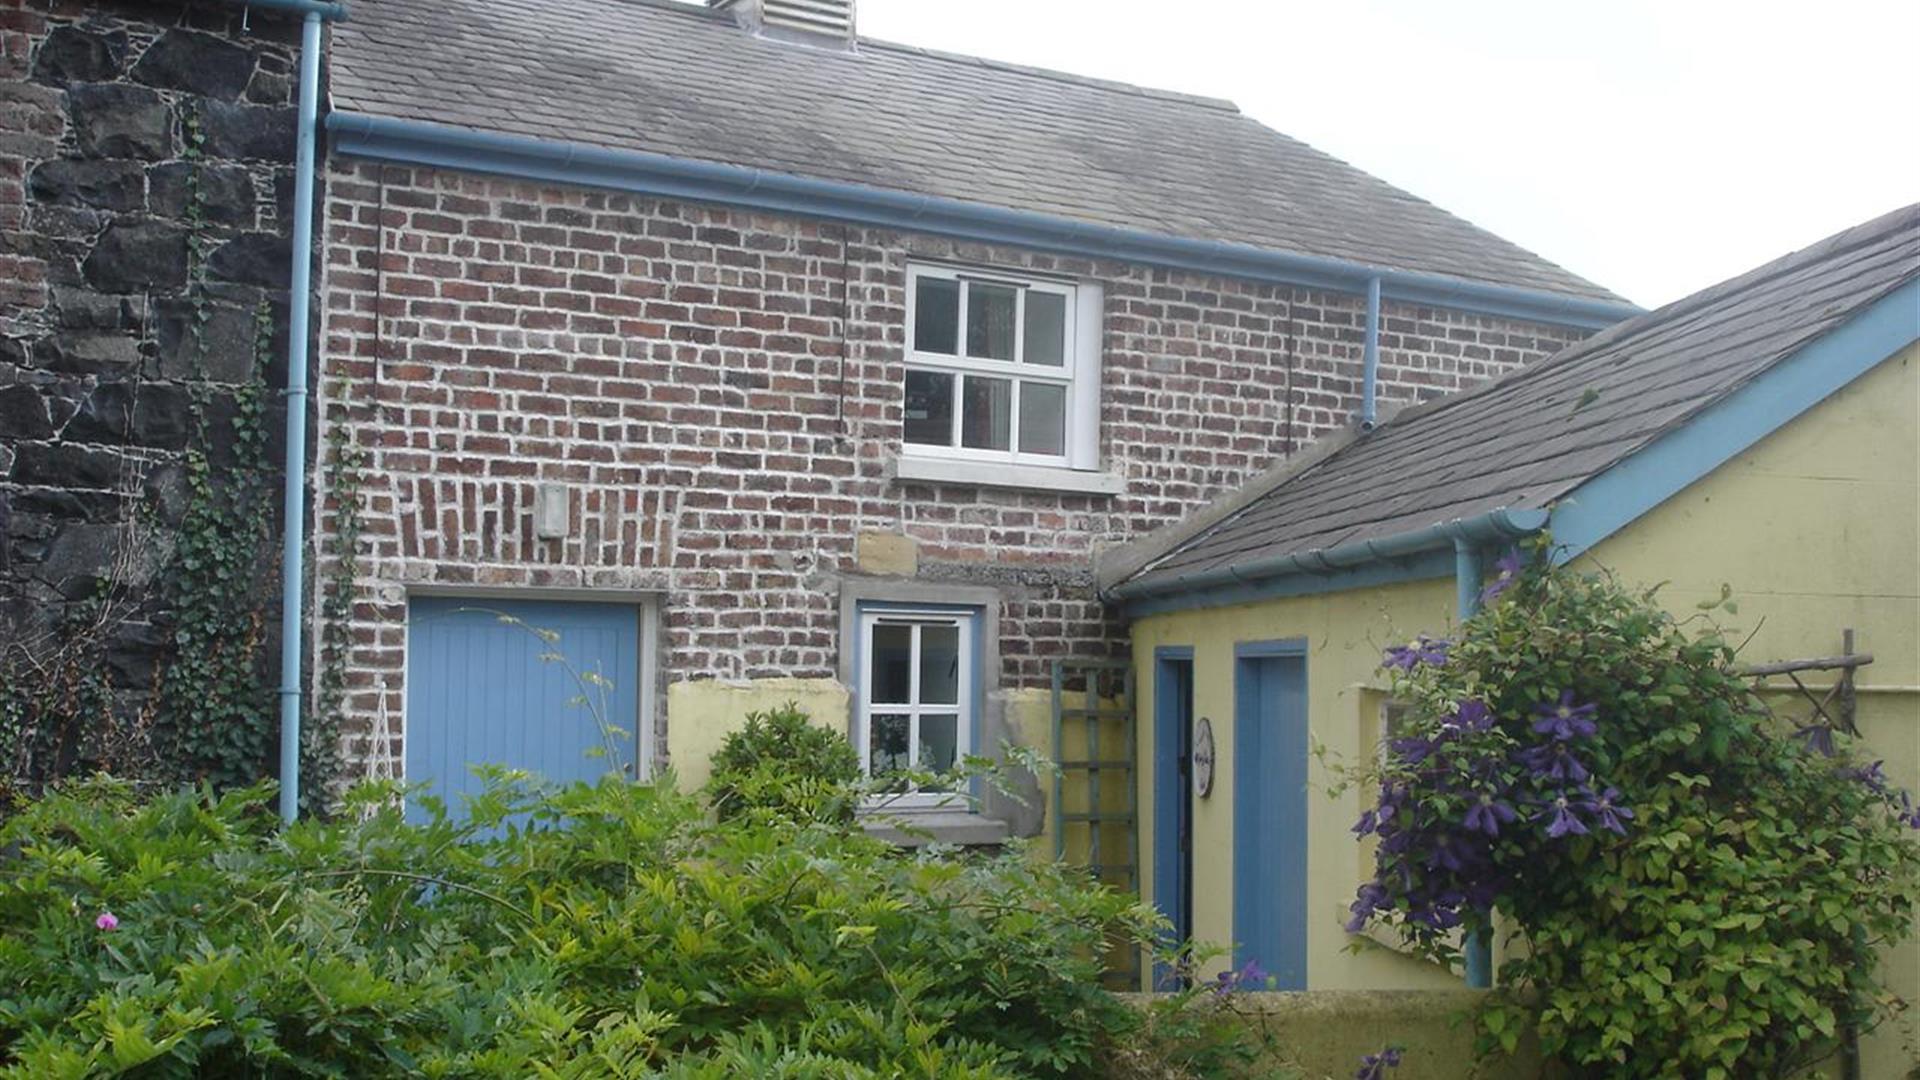 Ballydougan Pottery Courtyard Cottages - Dobsons Corner